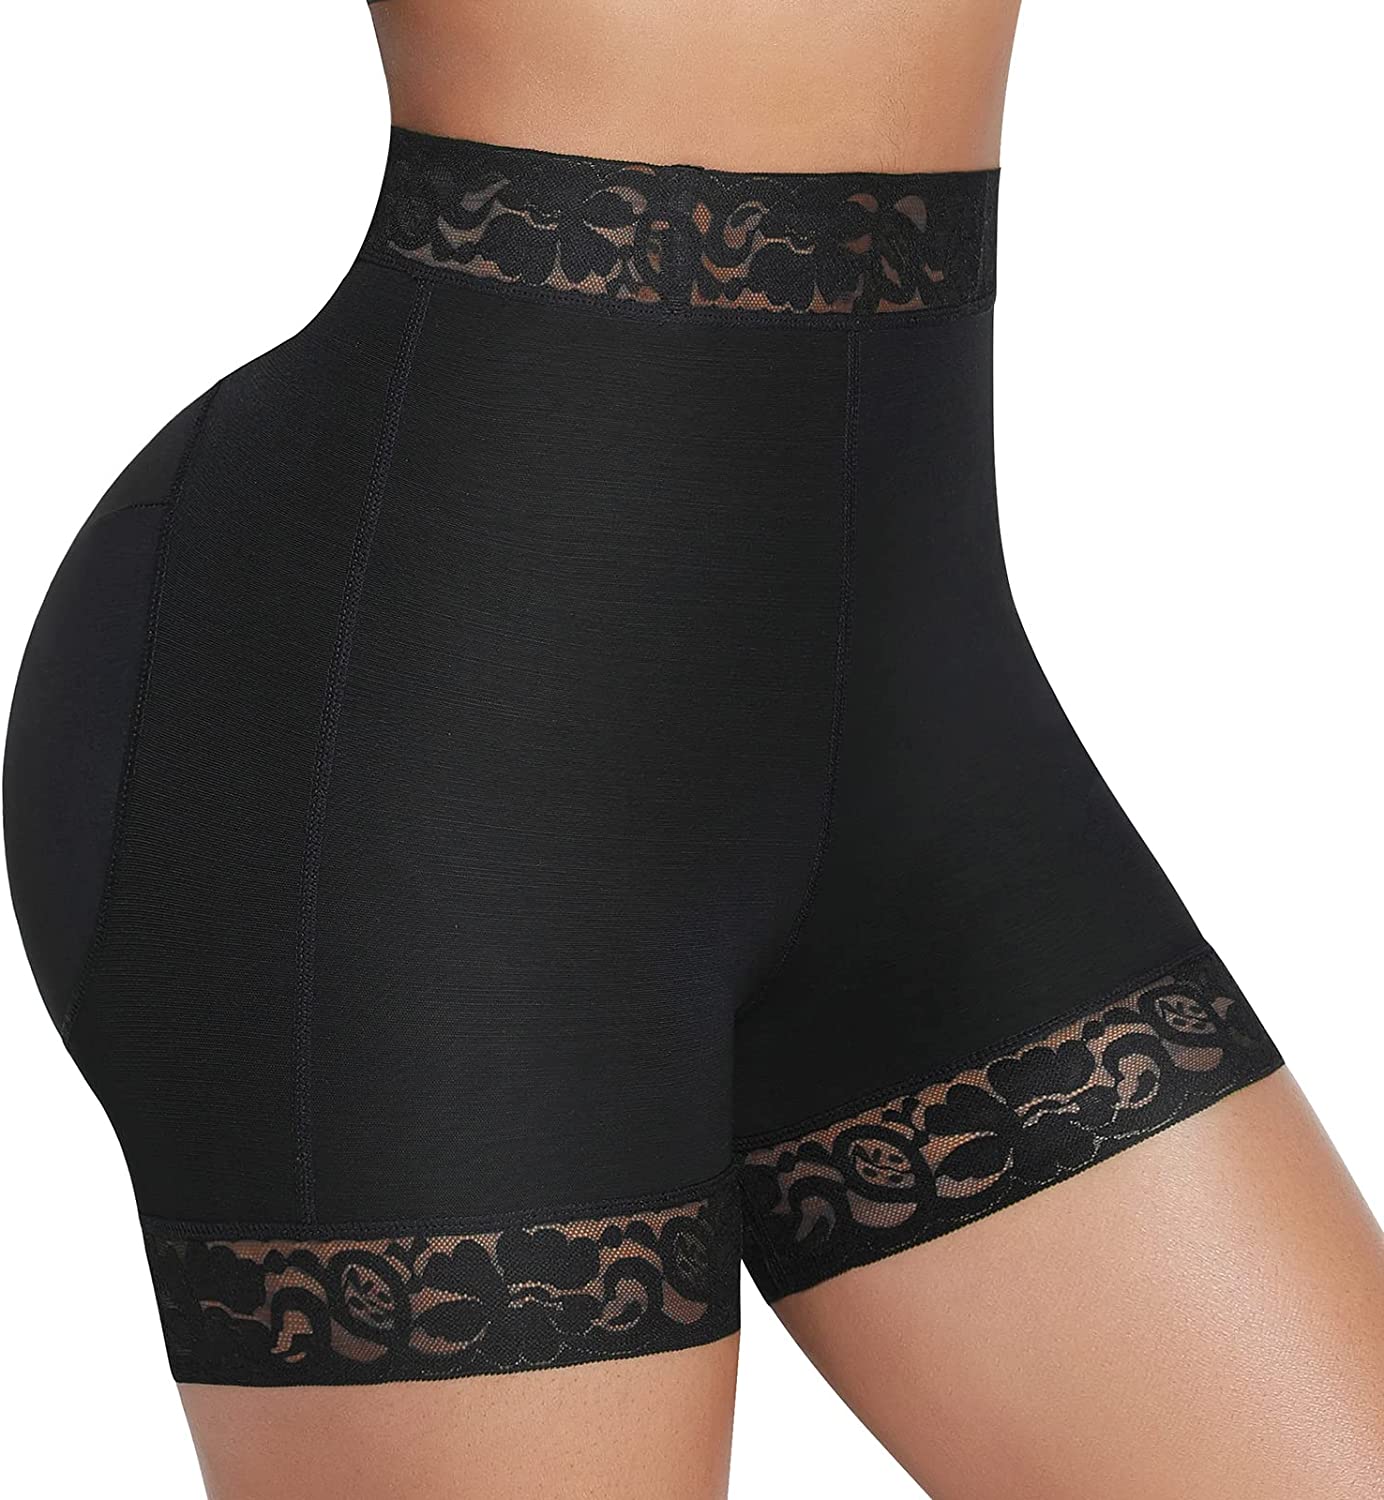 Seamless Butt Lifting Lace Shaper Shorts with Bones